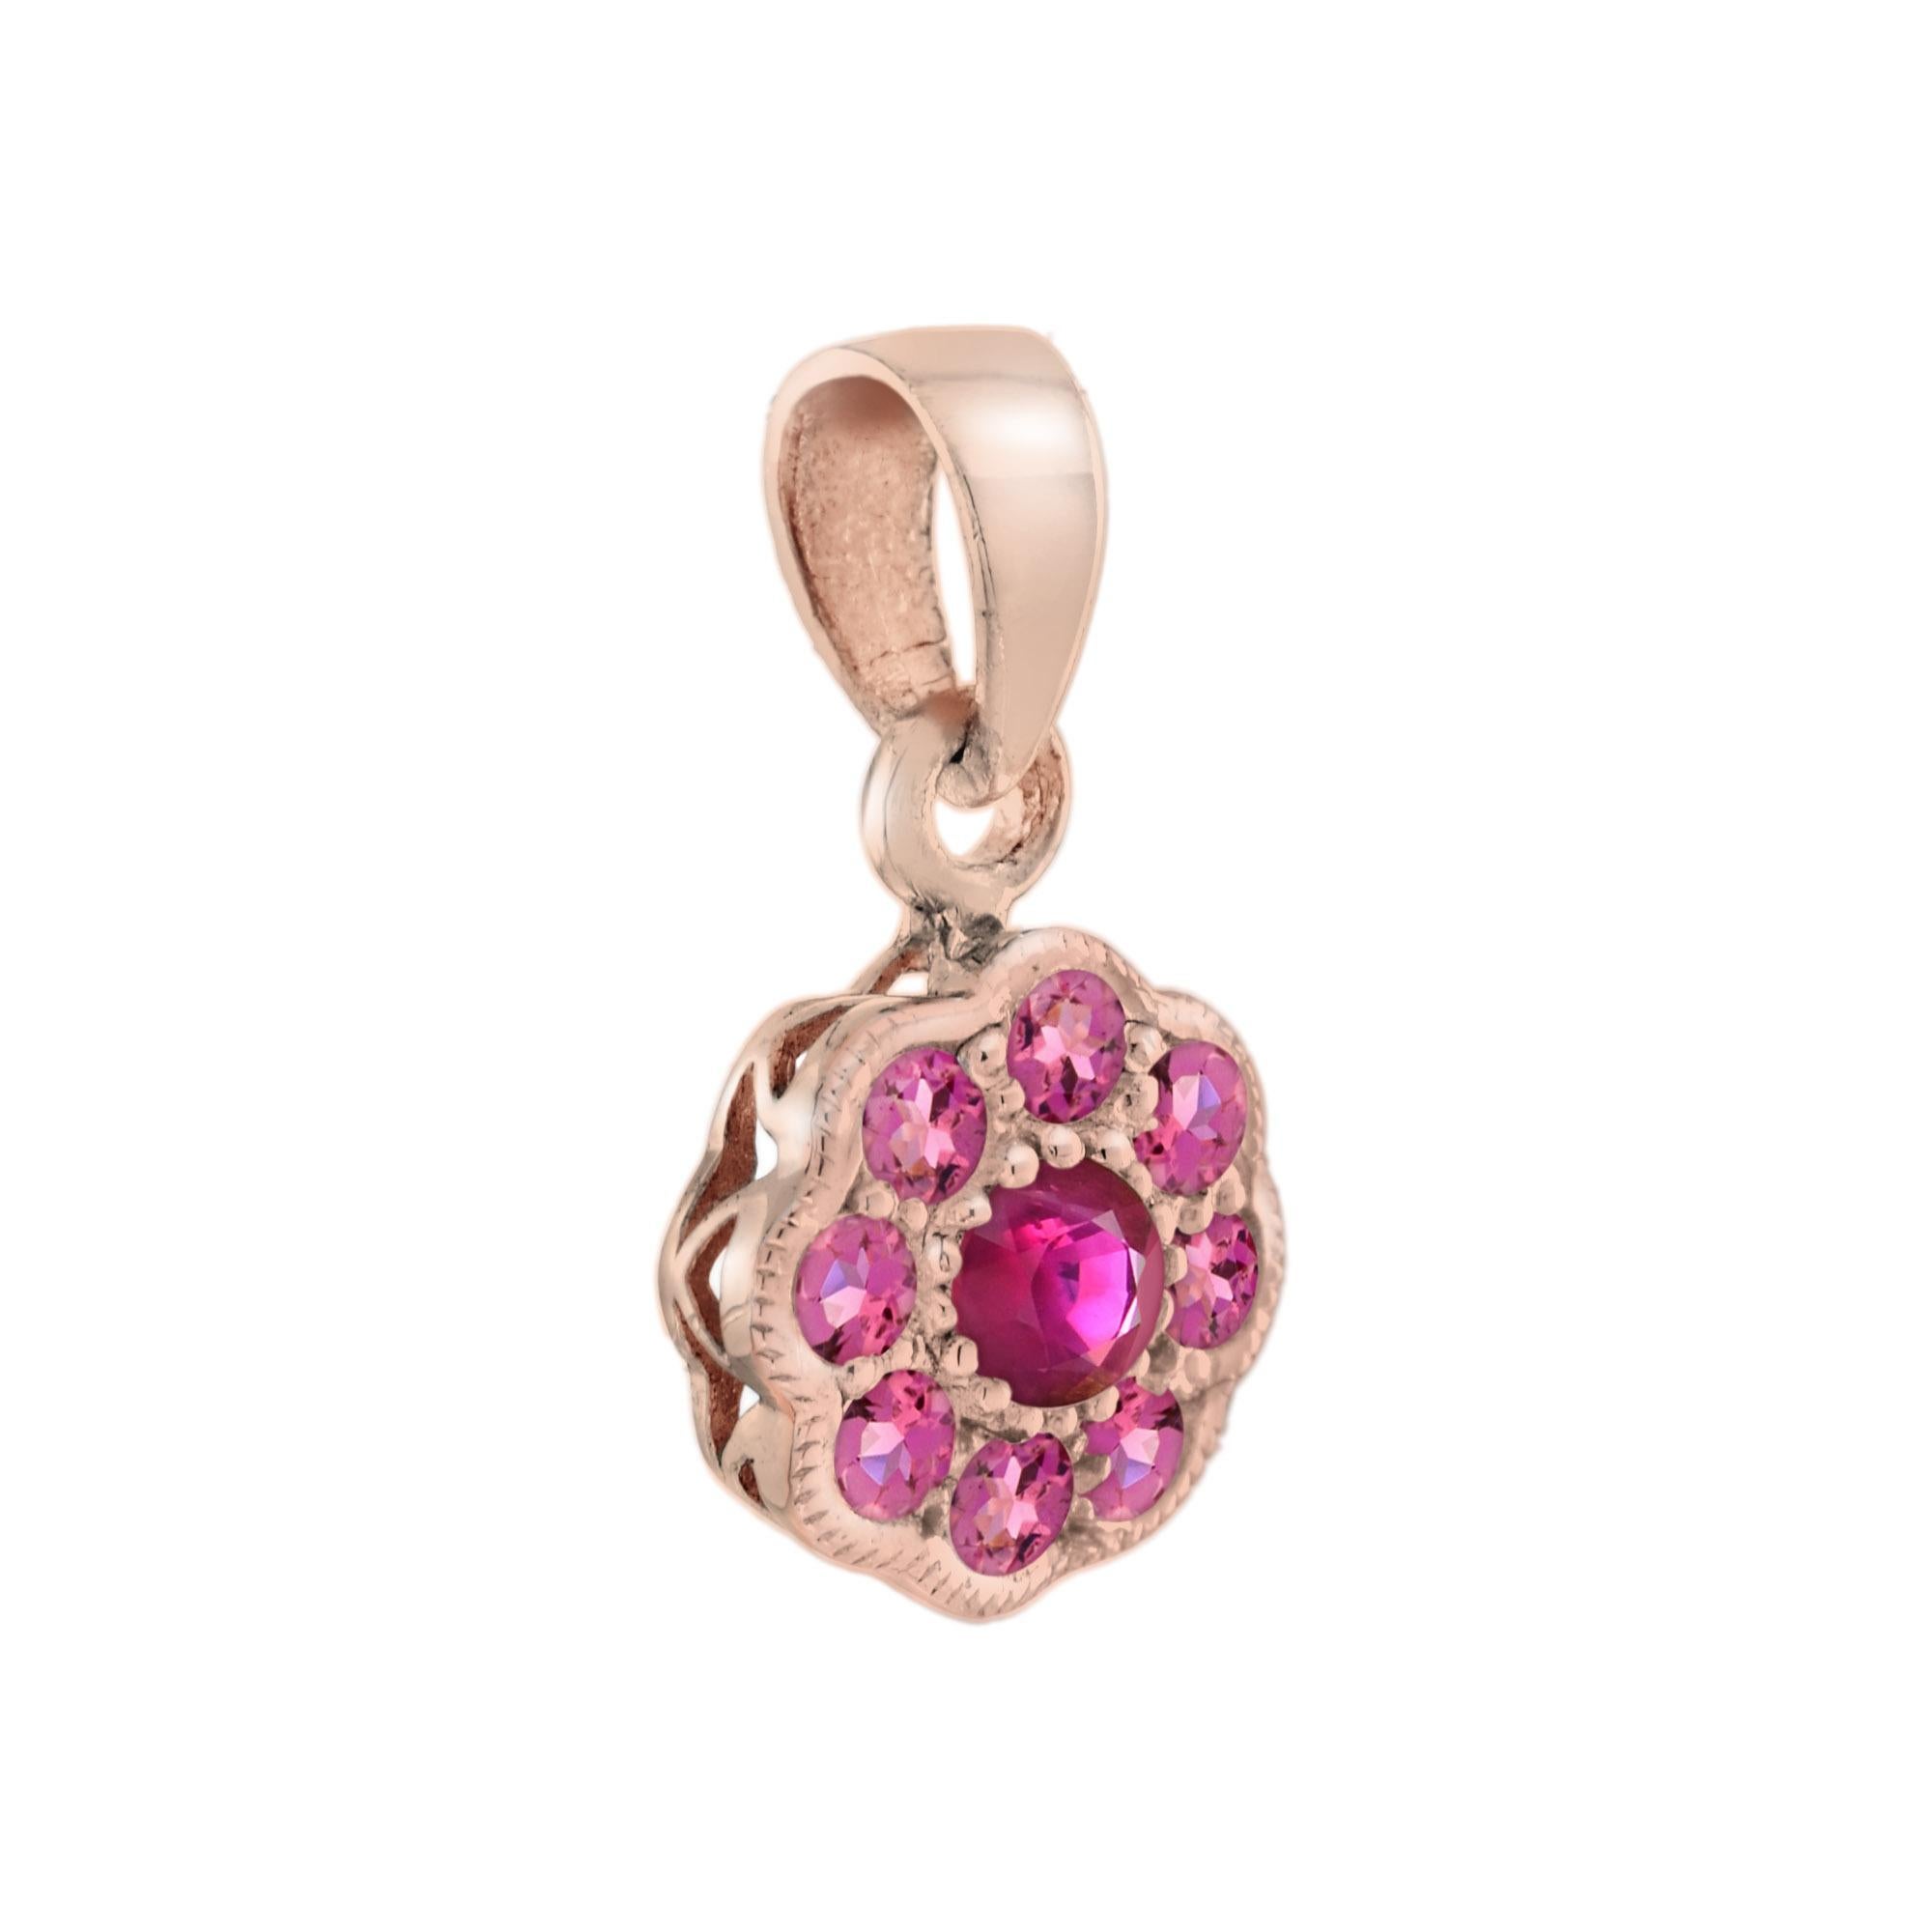 A stunning and beautiful design of the iconic Edwardian style flower cluster pendant, featuring round ruby for its center and eight round cut striking pink tourmaline beautifully set into 14k rose gold.

Ring Information
Style: Edwardian
Metal: 14K